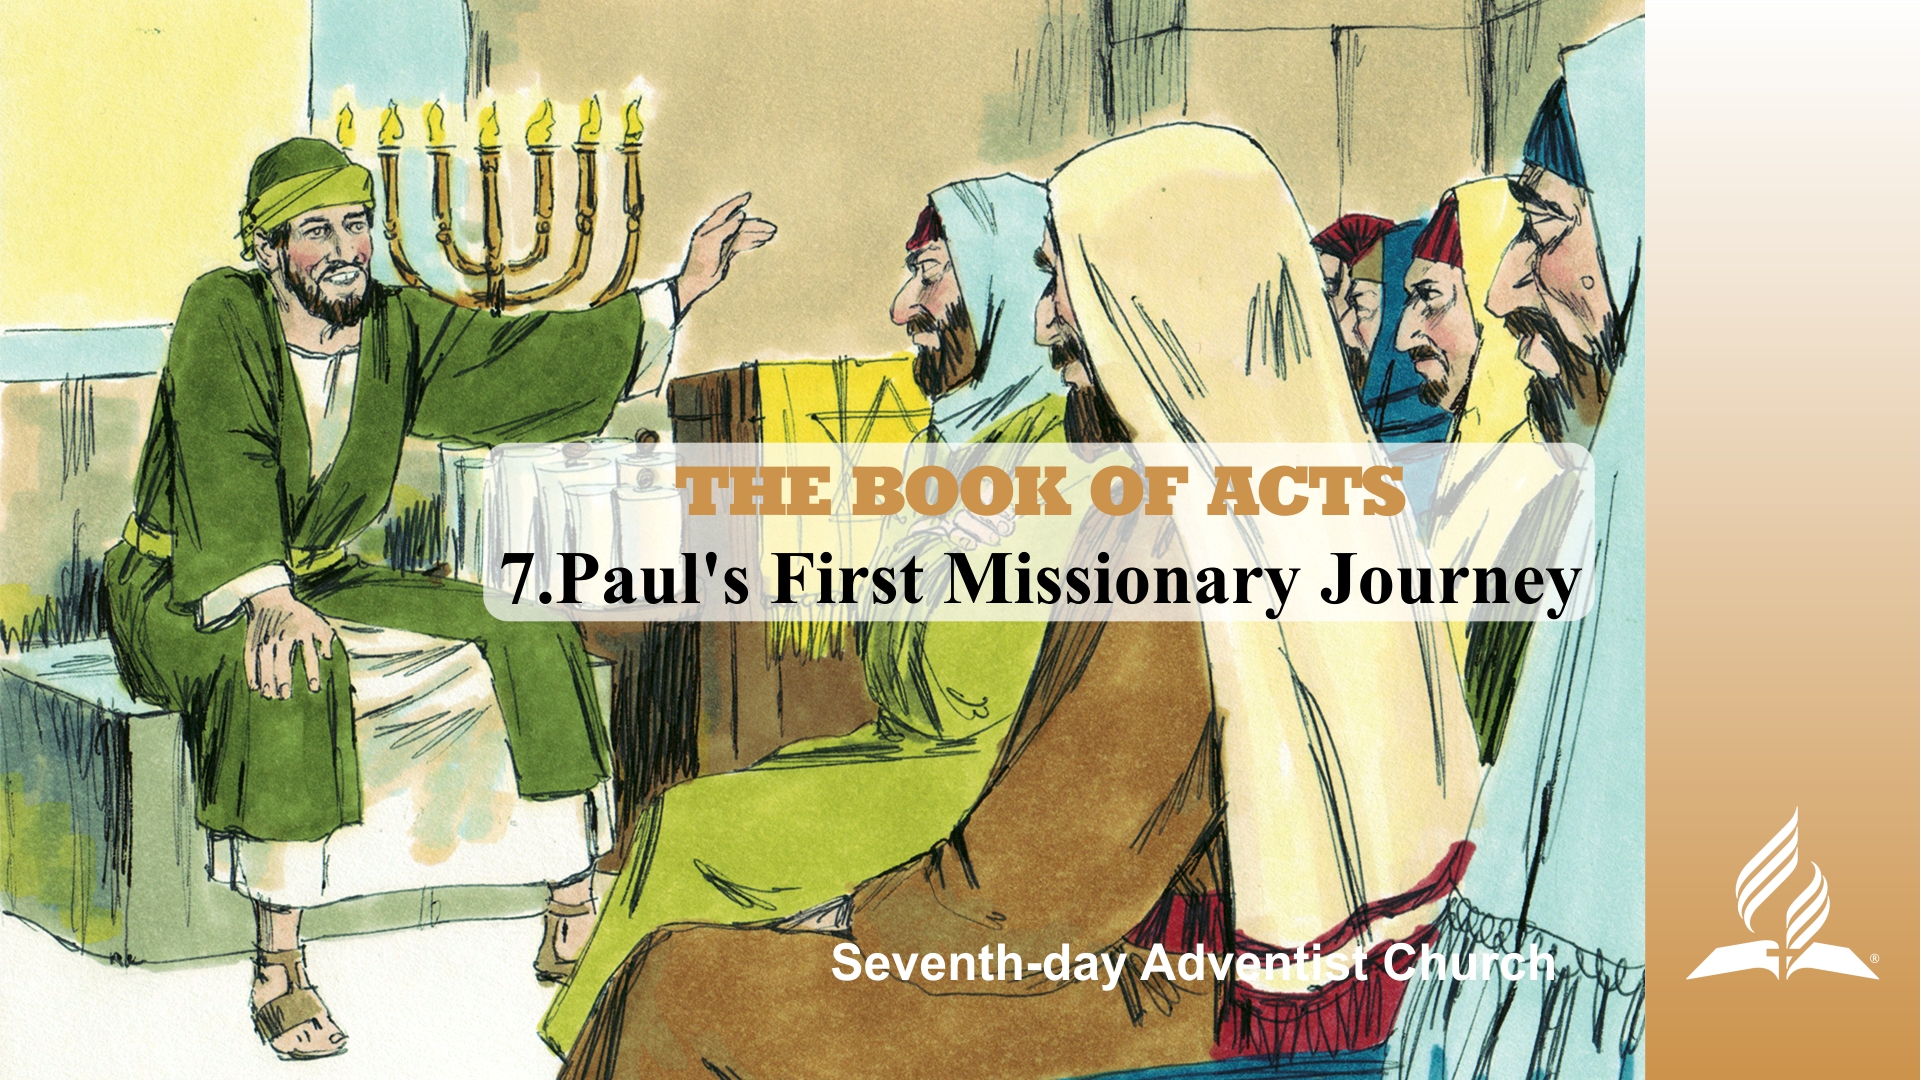 First journey pauls missionary Paul's First